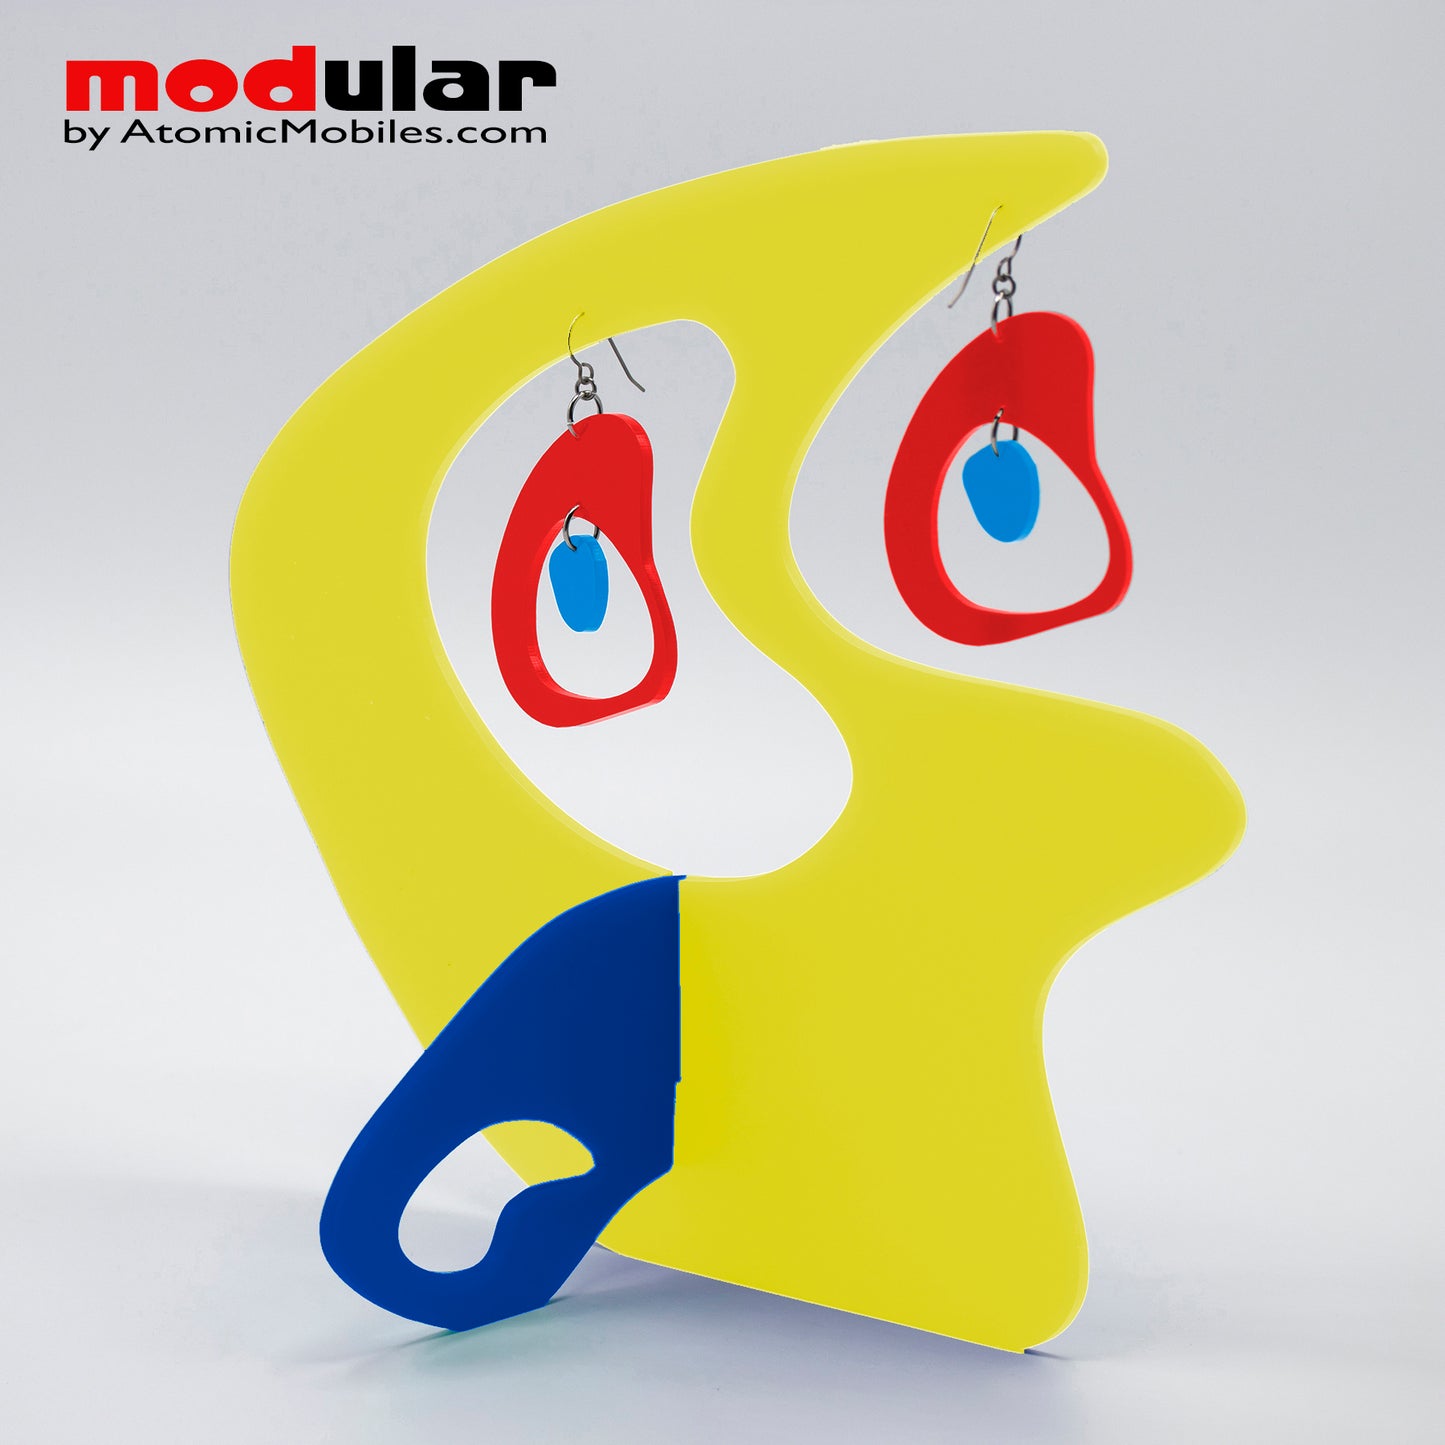 Handmade Boomerang Retro style earrings and stabile kinetic modern art sculpture in Yellow Red and Blue by AtomicMobiles.com